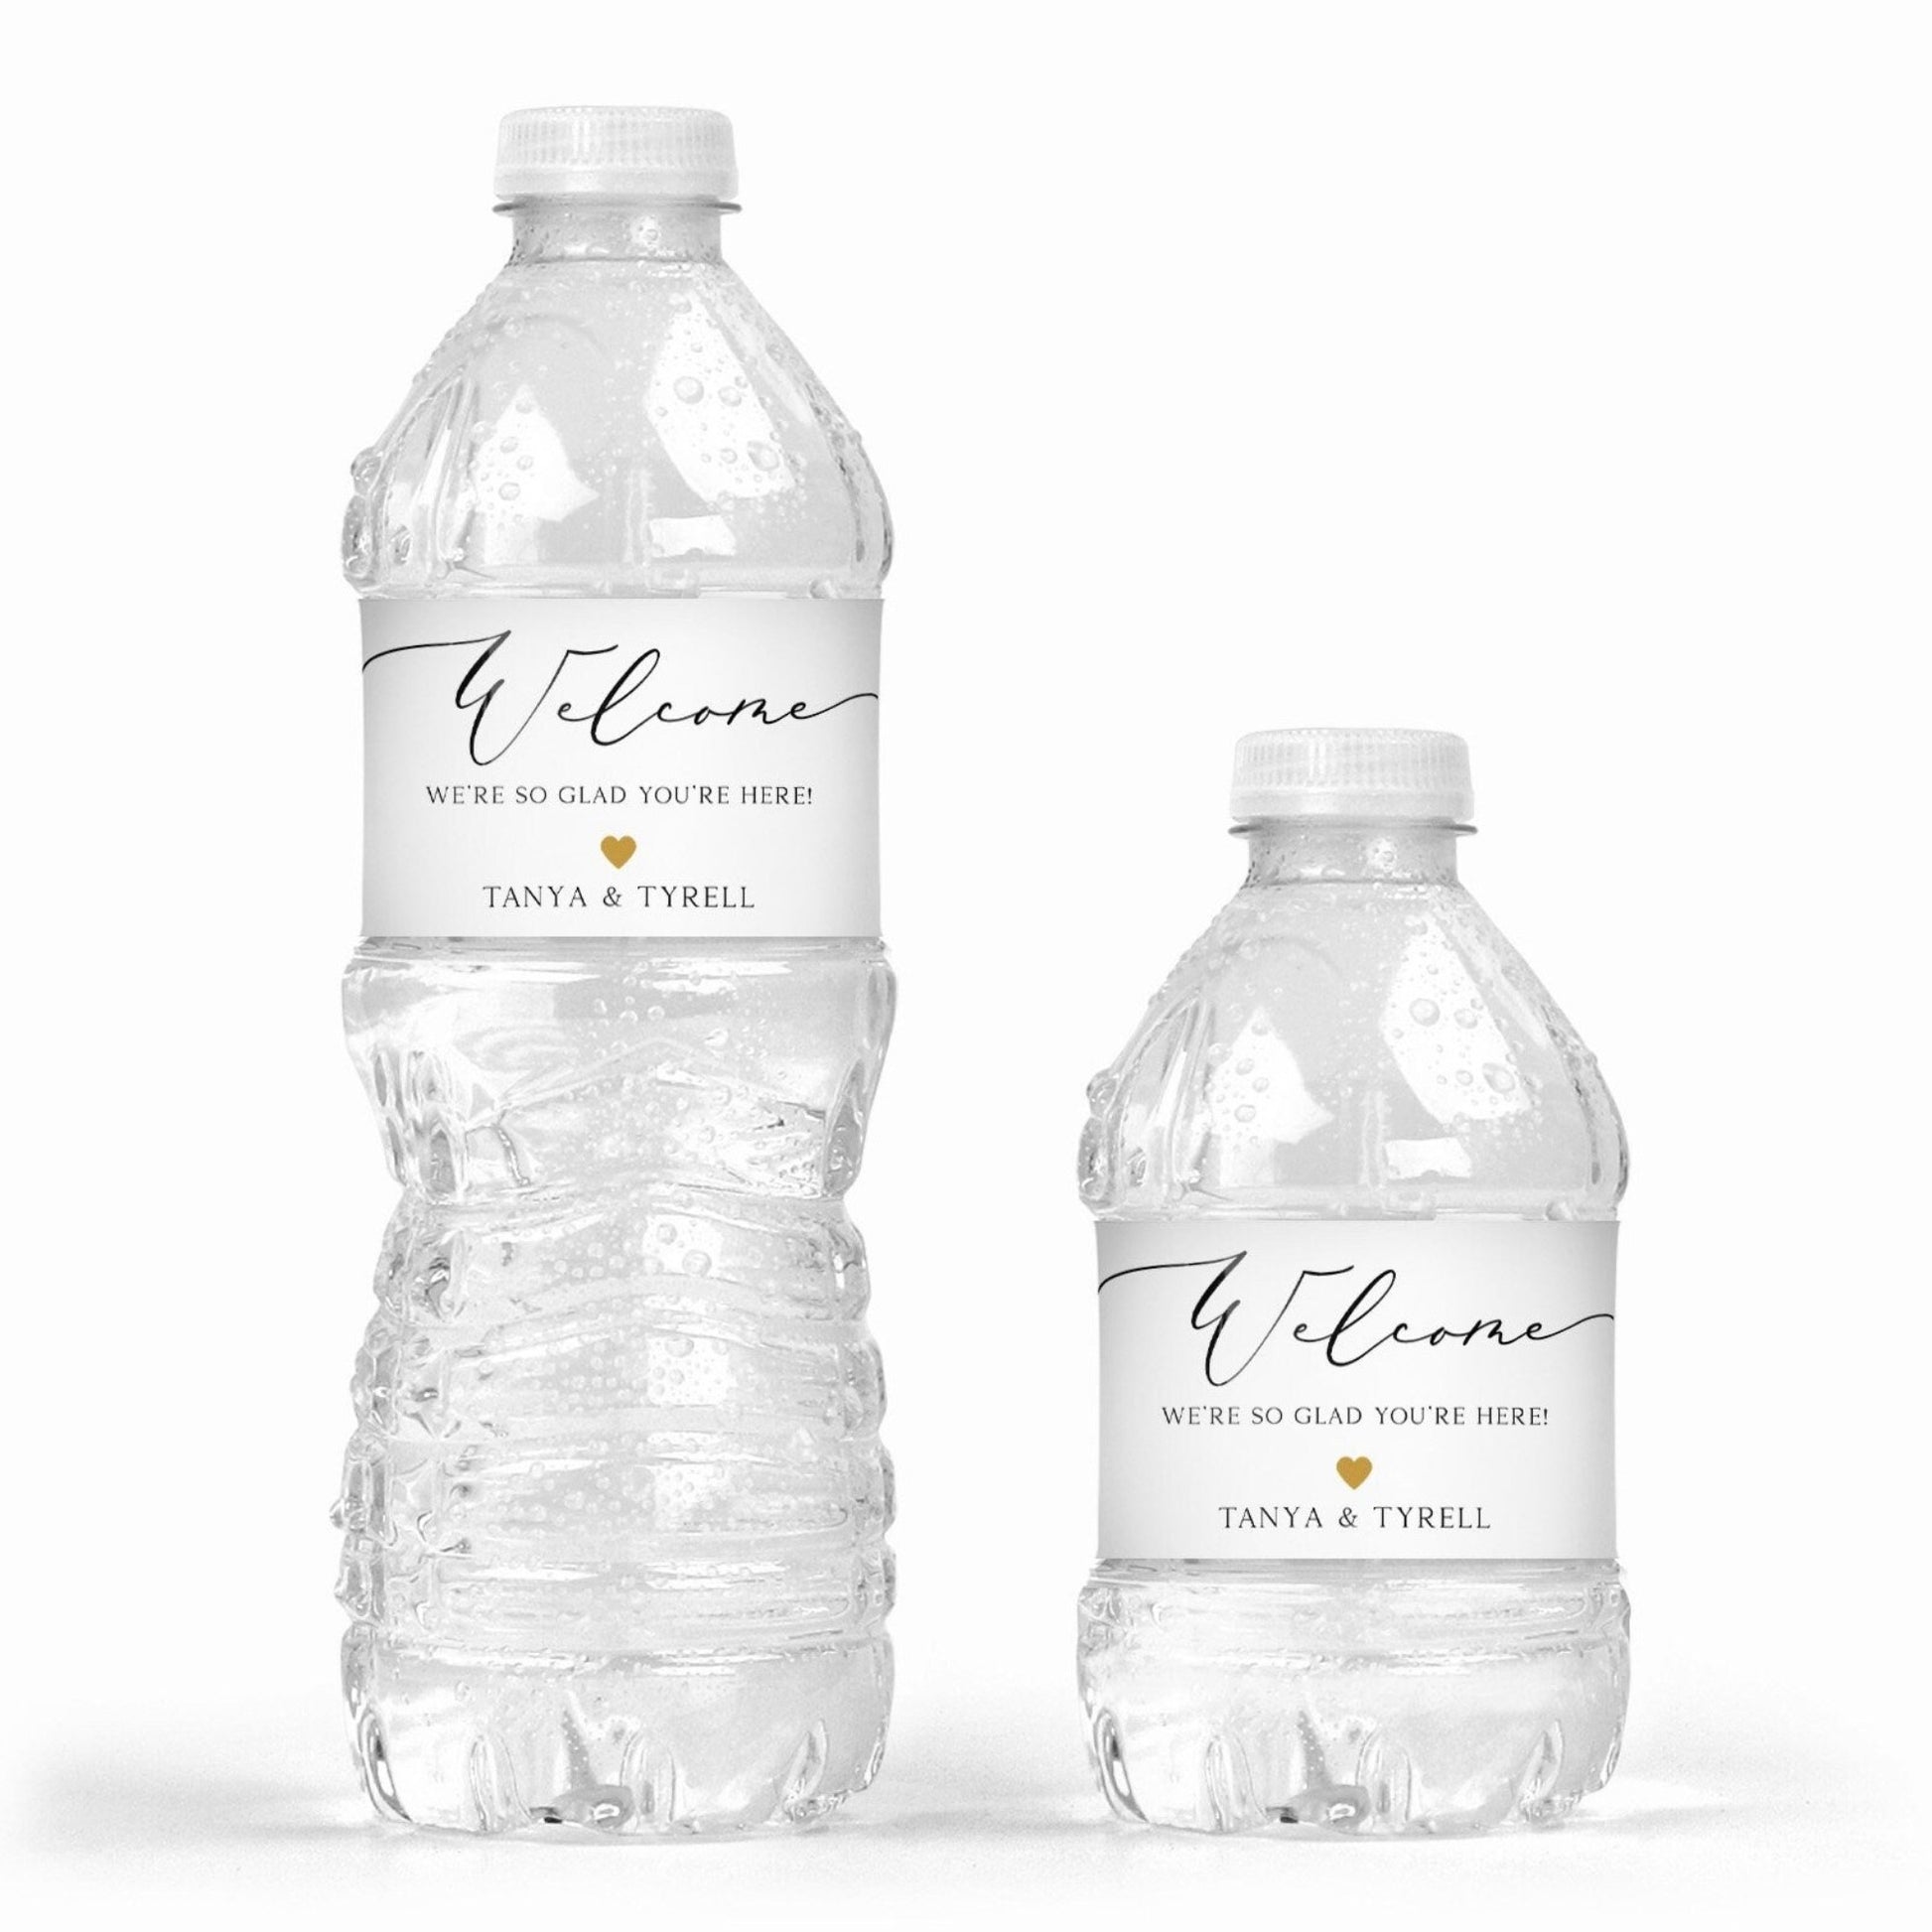 Water Bottle Labels - Welcome Wedding Labels, Gold Heart Wedding Labels, Wedding Welcome Bag Stickers. Water Bottle Stickers, Water Labels